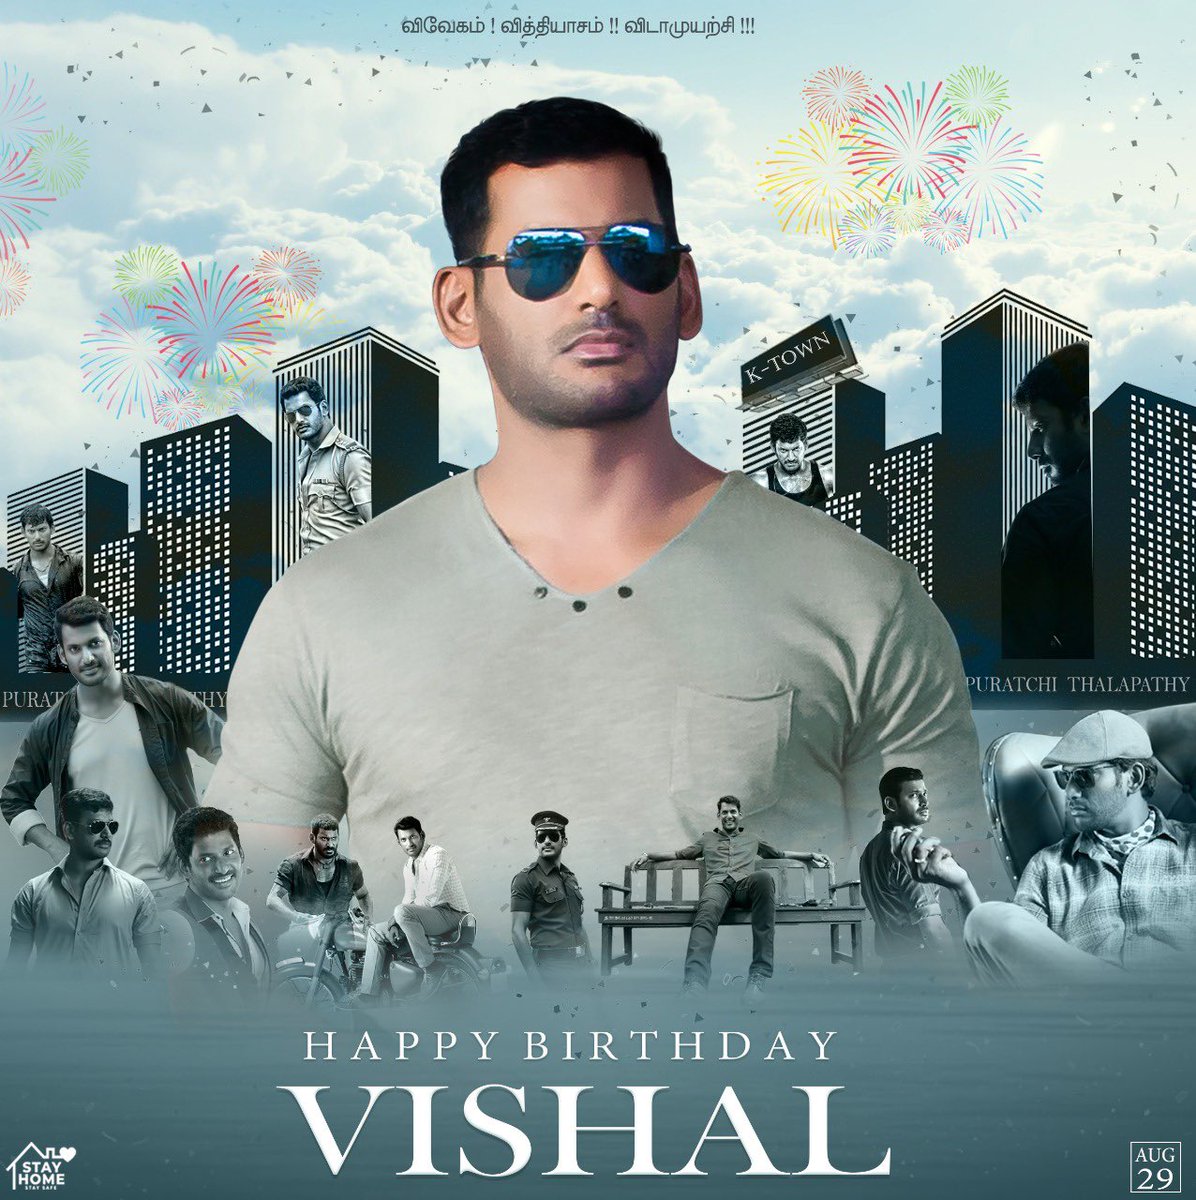 Here is The Common DP To Celebrate Action Hero, Puratchi Thalapathy @VishalKOfficial’s Birthday!

#HBDVishal
#HappyBirthdayVishal 
#VishalBdayCDP 

#Vishal @VffVishal